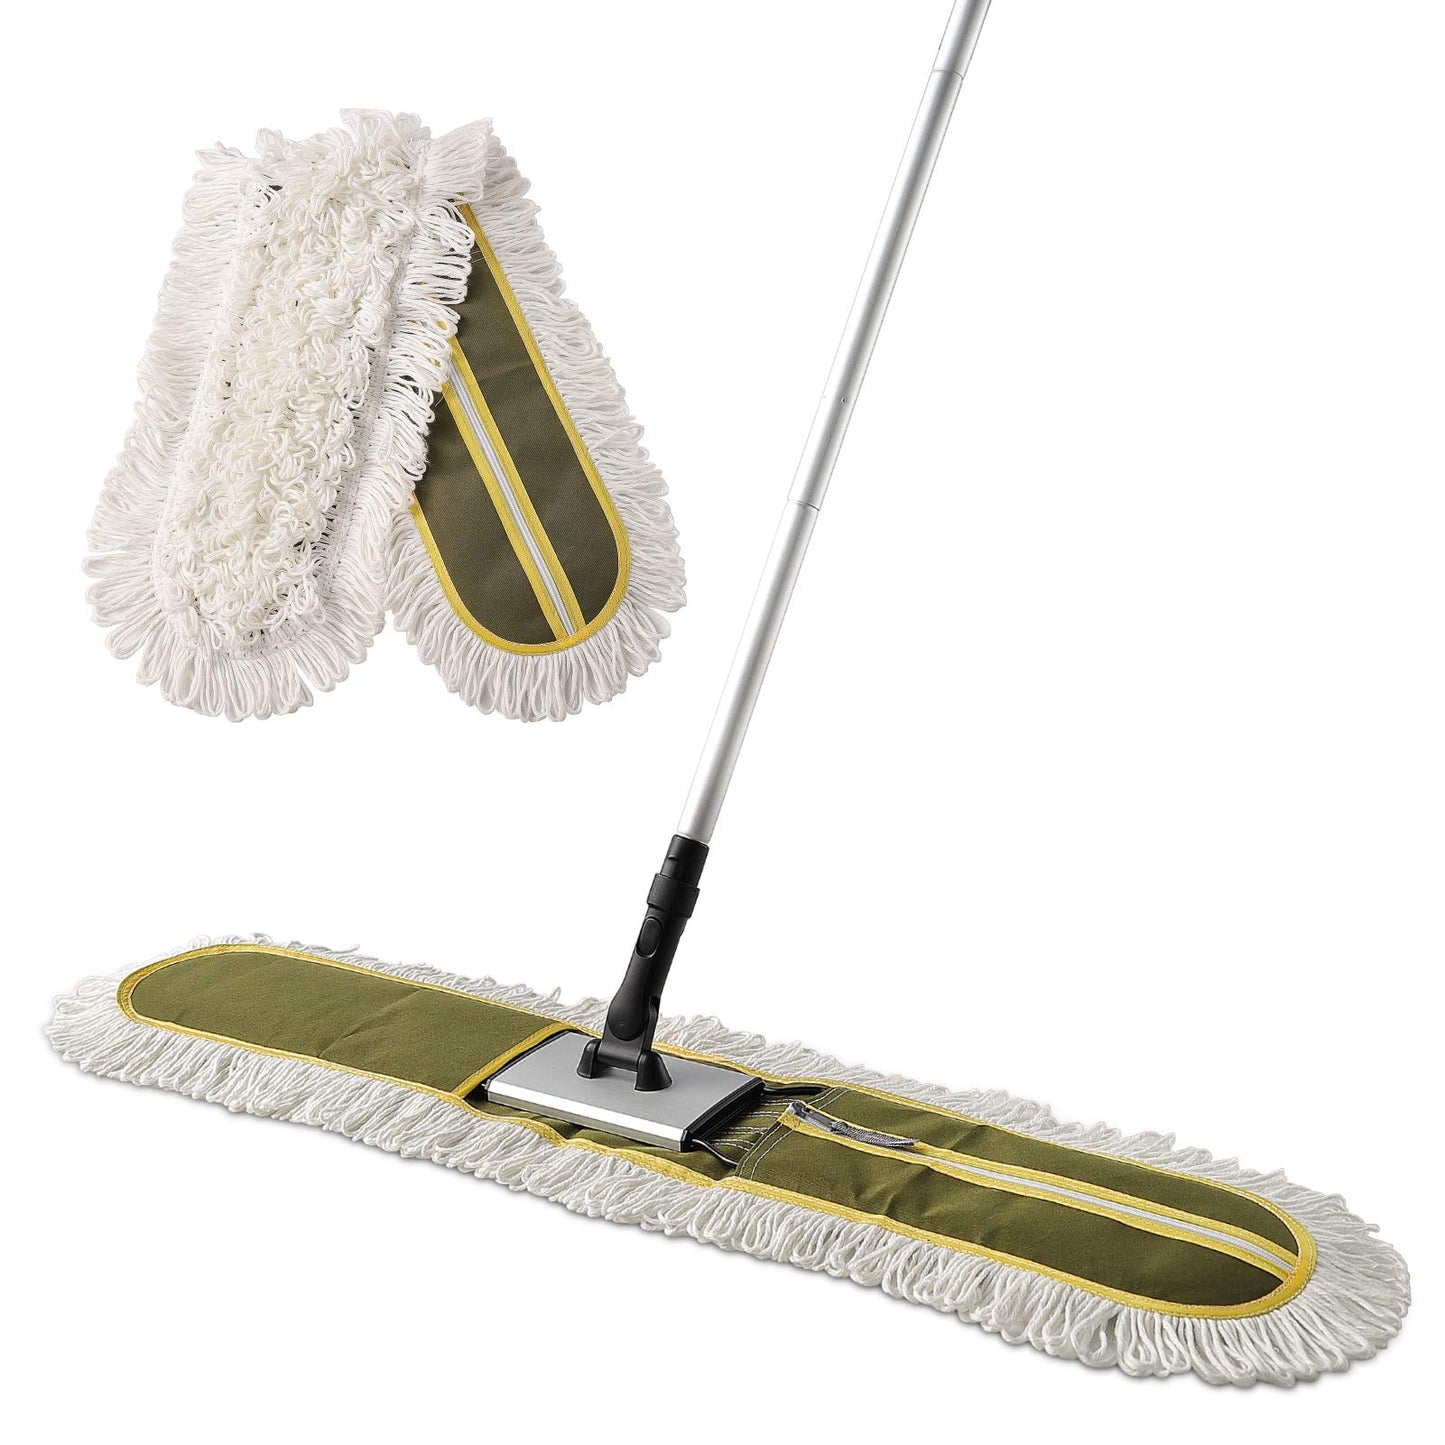 36" Commercial Dust Mops for Floor Cleaning Heavy Duty Floor Duster Mop with Long Handle Hotel Gym Household Cleaning Supplies for Hardwood